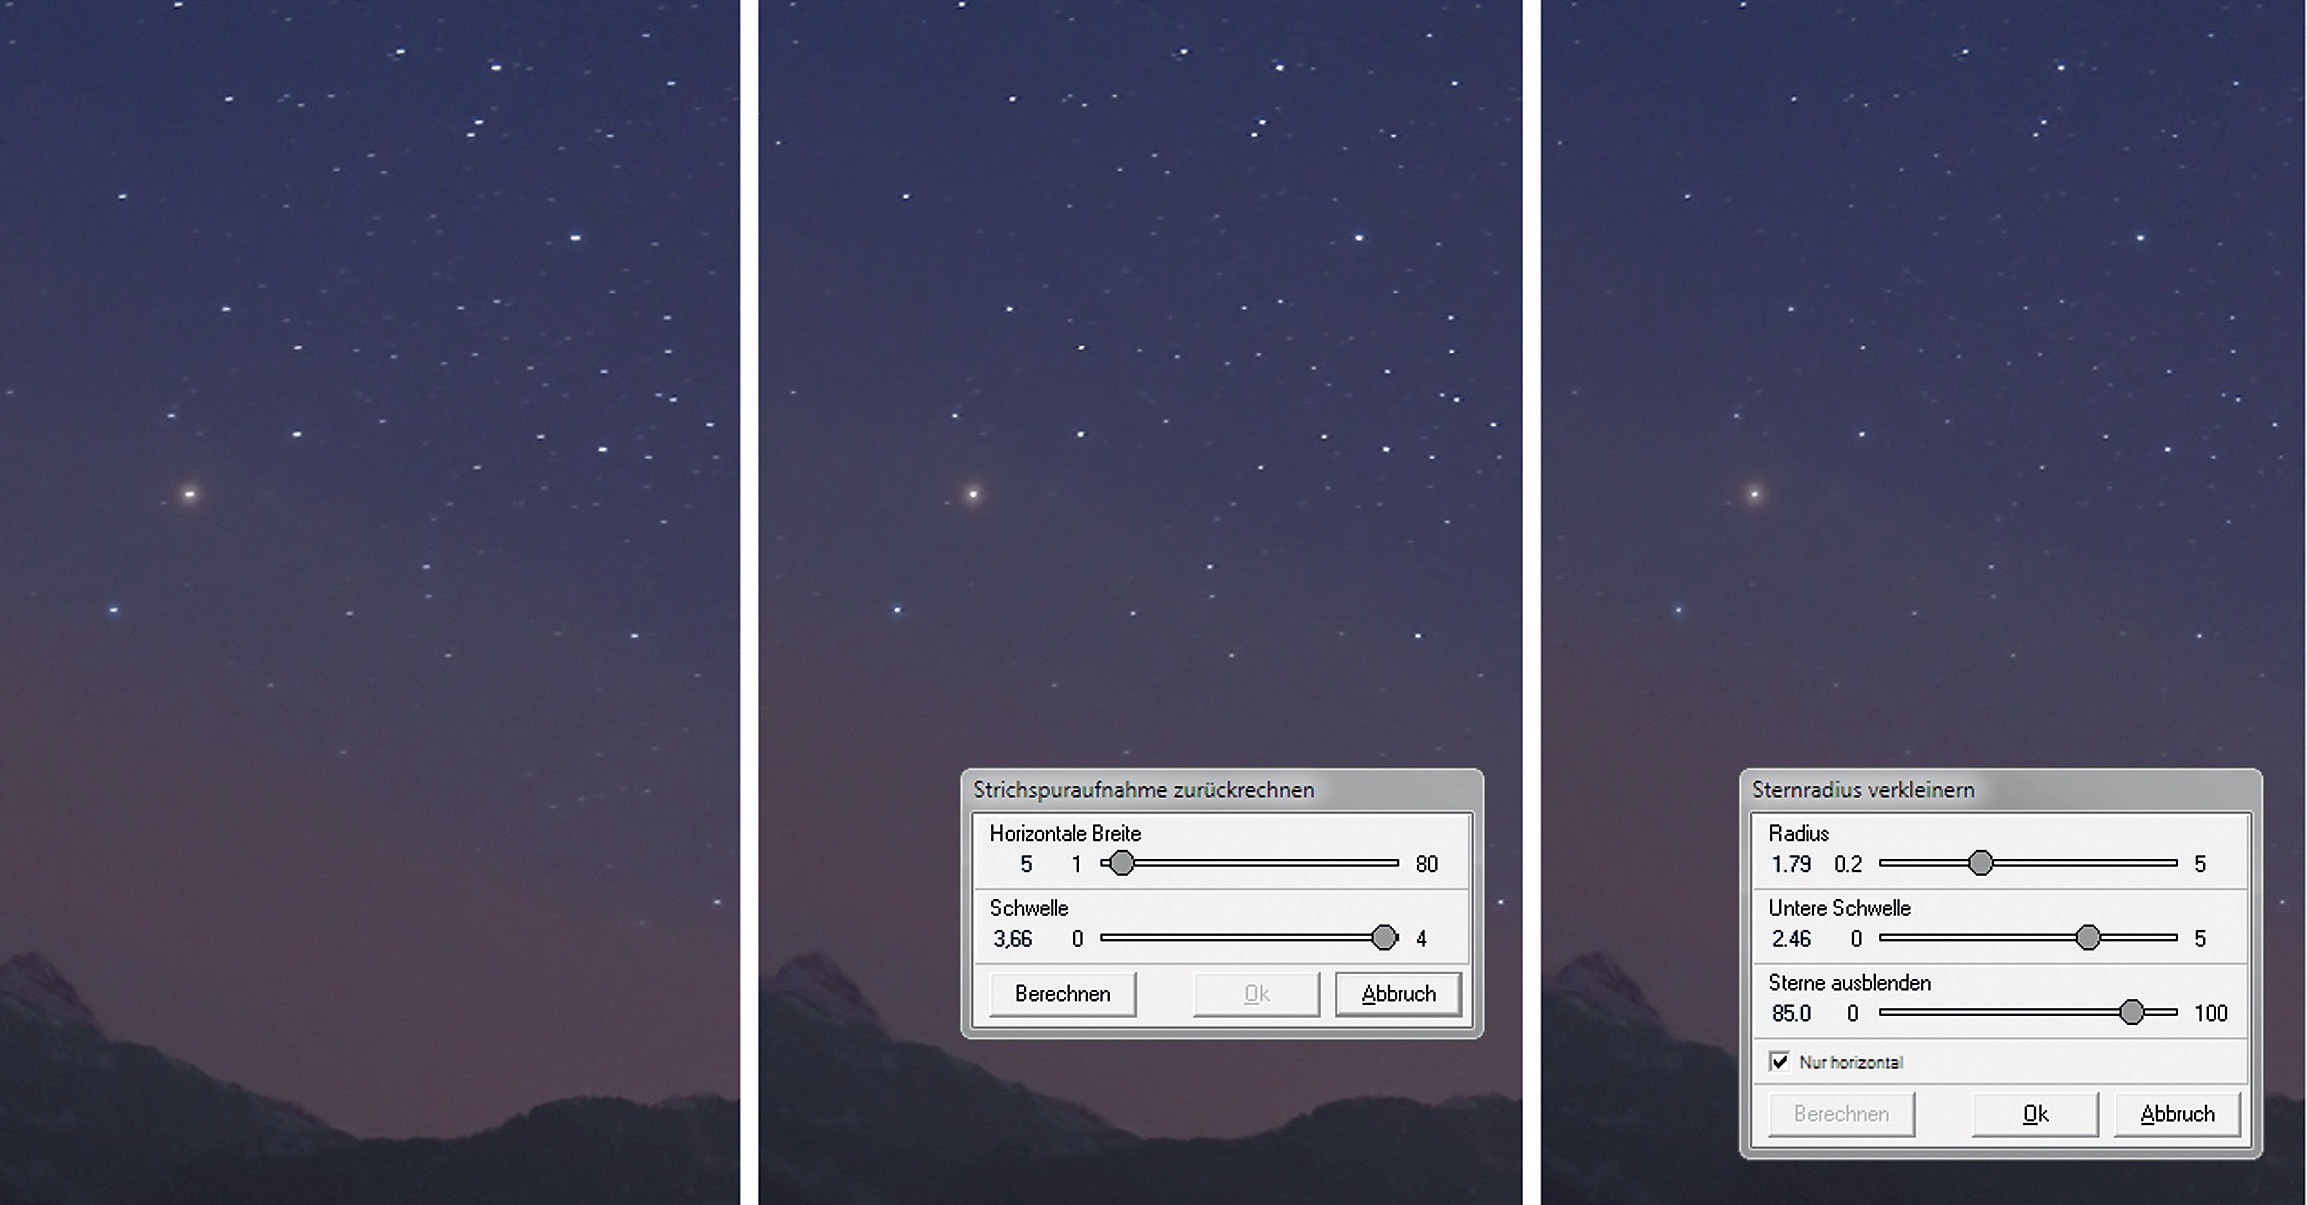 An image of the constellation Scorpio over the Alps (left). The image still shows clearly distorted stars even when reduced. The middle image shows the result of selecting Deconvolute Star Trails and the settings used. On the right are the settings and the result of selecting Decrease Star Radius. M. Weigand